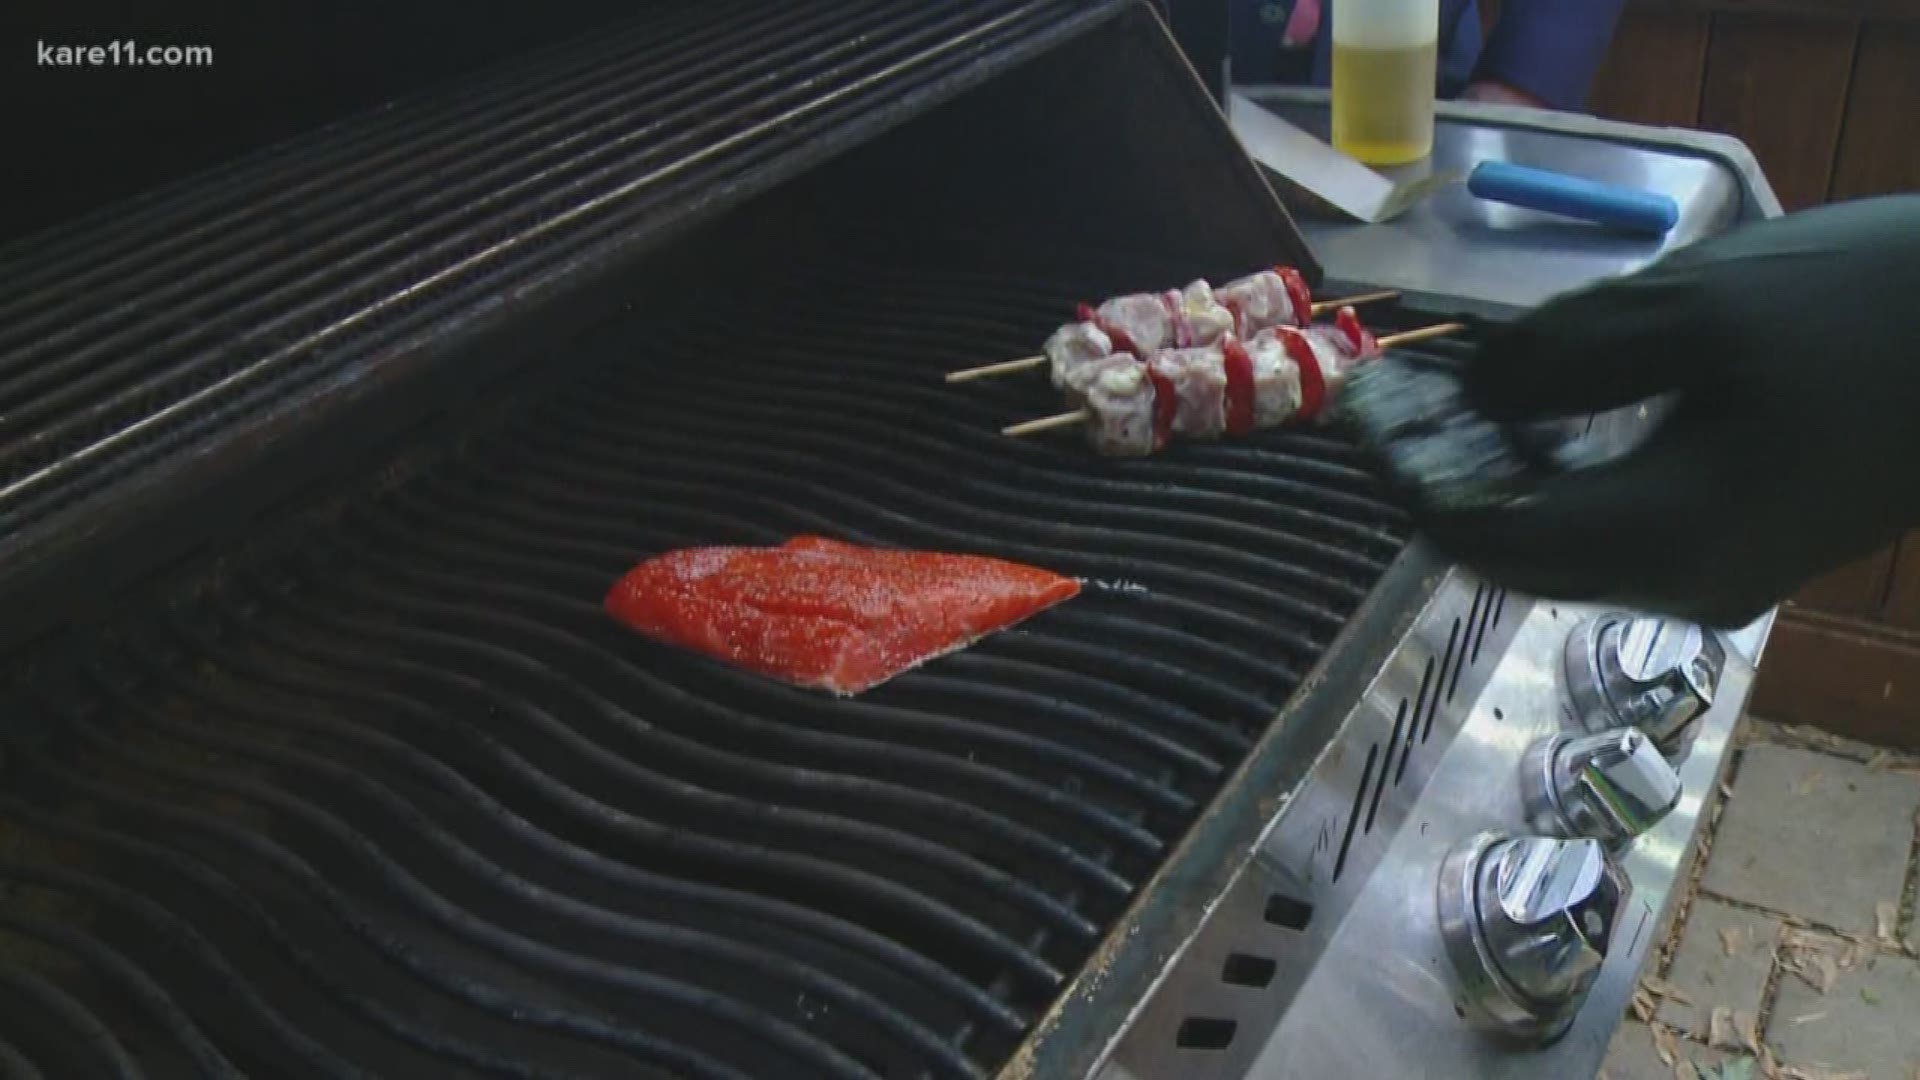 Ross Heier, Redstone American Grill Executive Chef stopped by the KARE 11 backyard to share some salmon grilling tips.